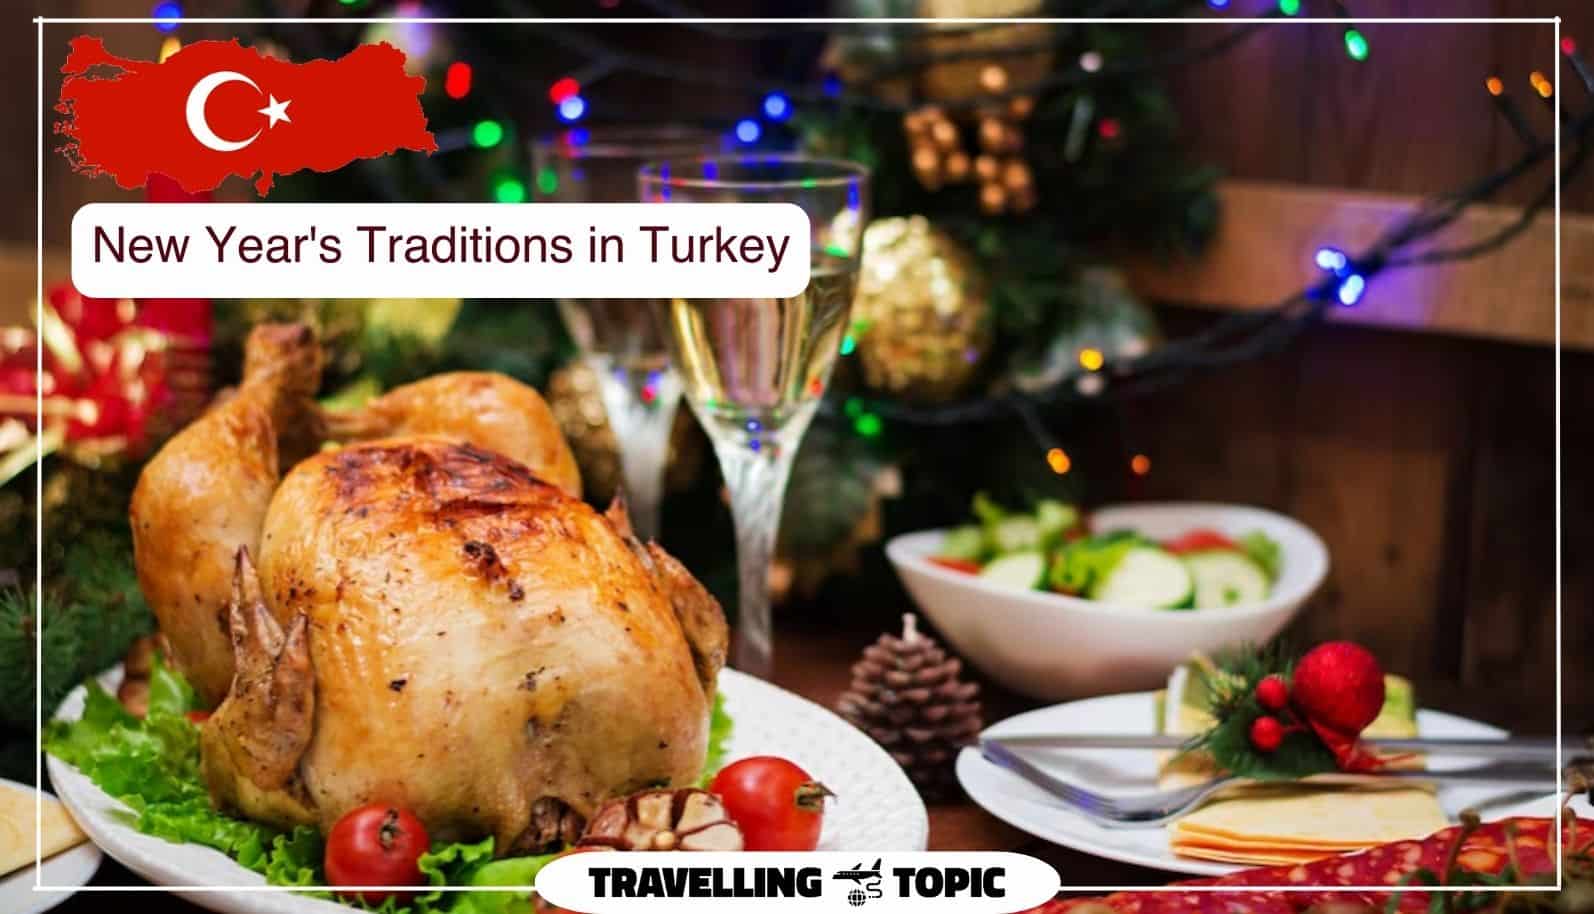 New Year's Traditions in Turkey